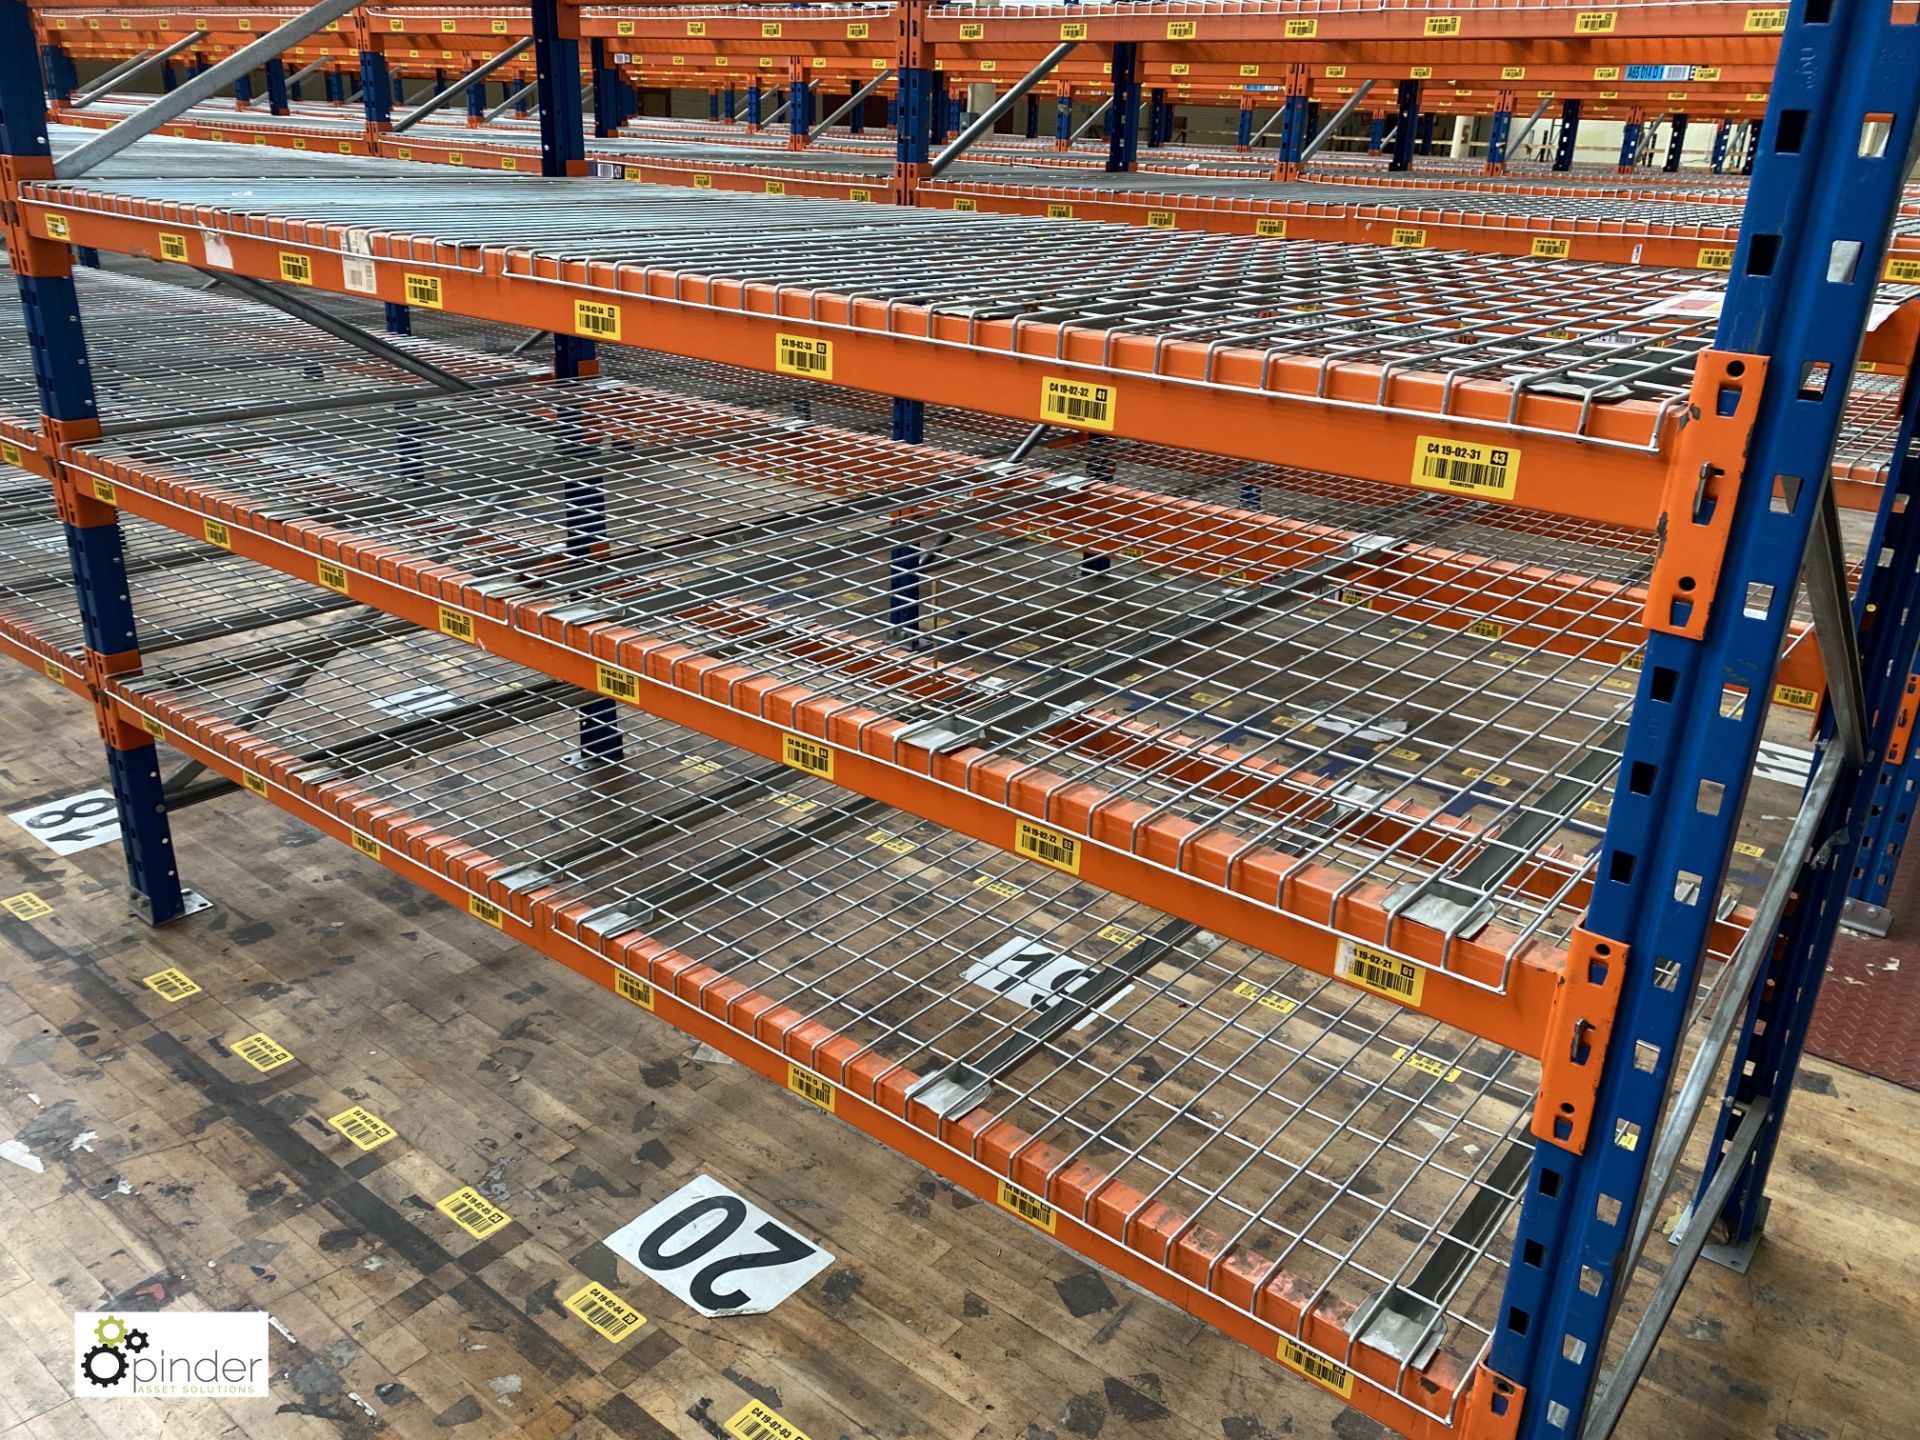 8 bays PSS 2K85 16 boltless Stock Racking, comprising 9 uprights 2400mm x 1200mm, 64 beams 2700mm, - Image 3 of 4